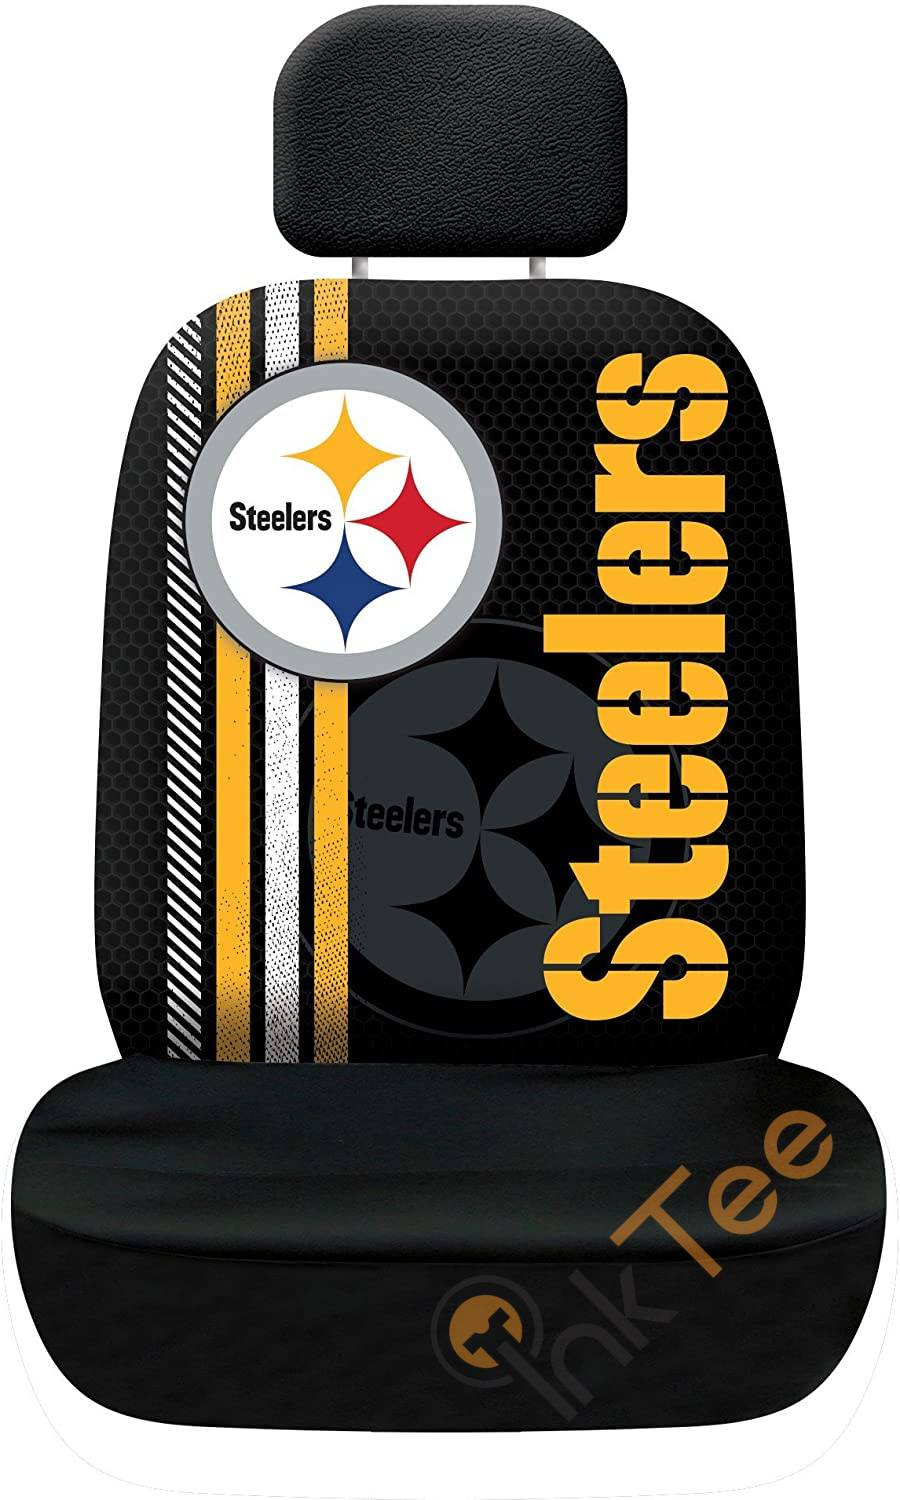 Nfl Pittsburgh Steelers Team Seat Cover